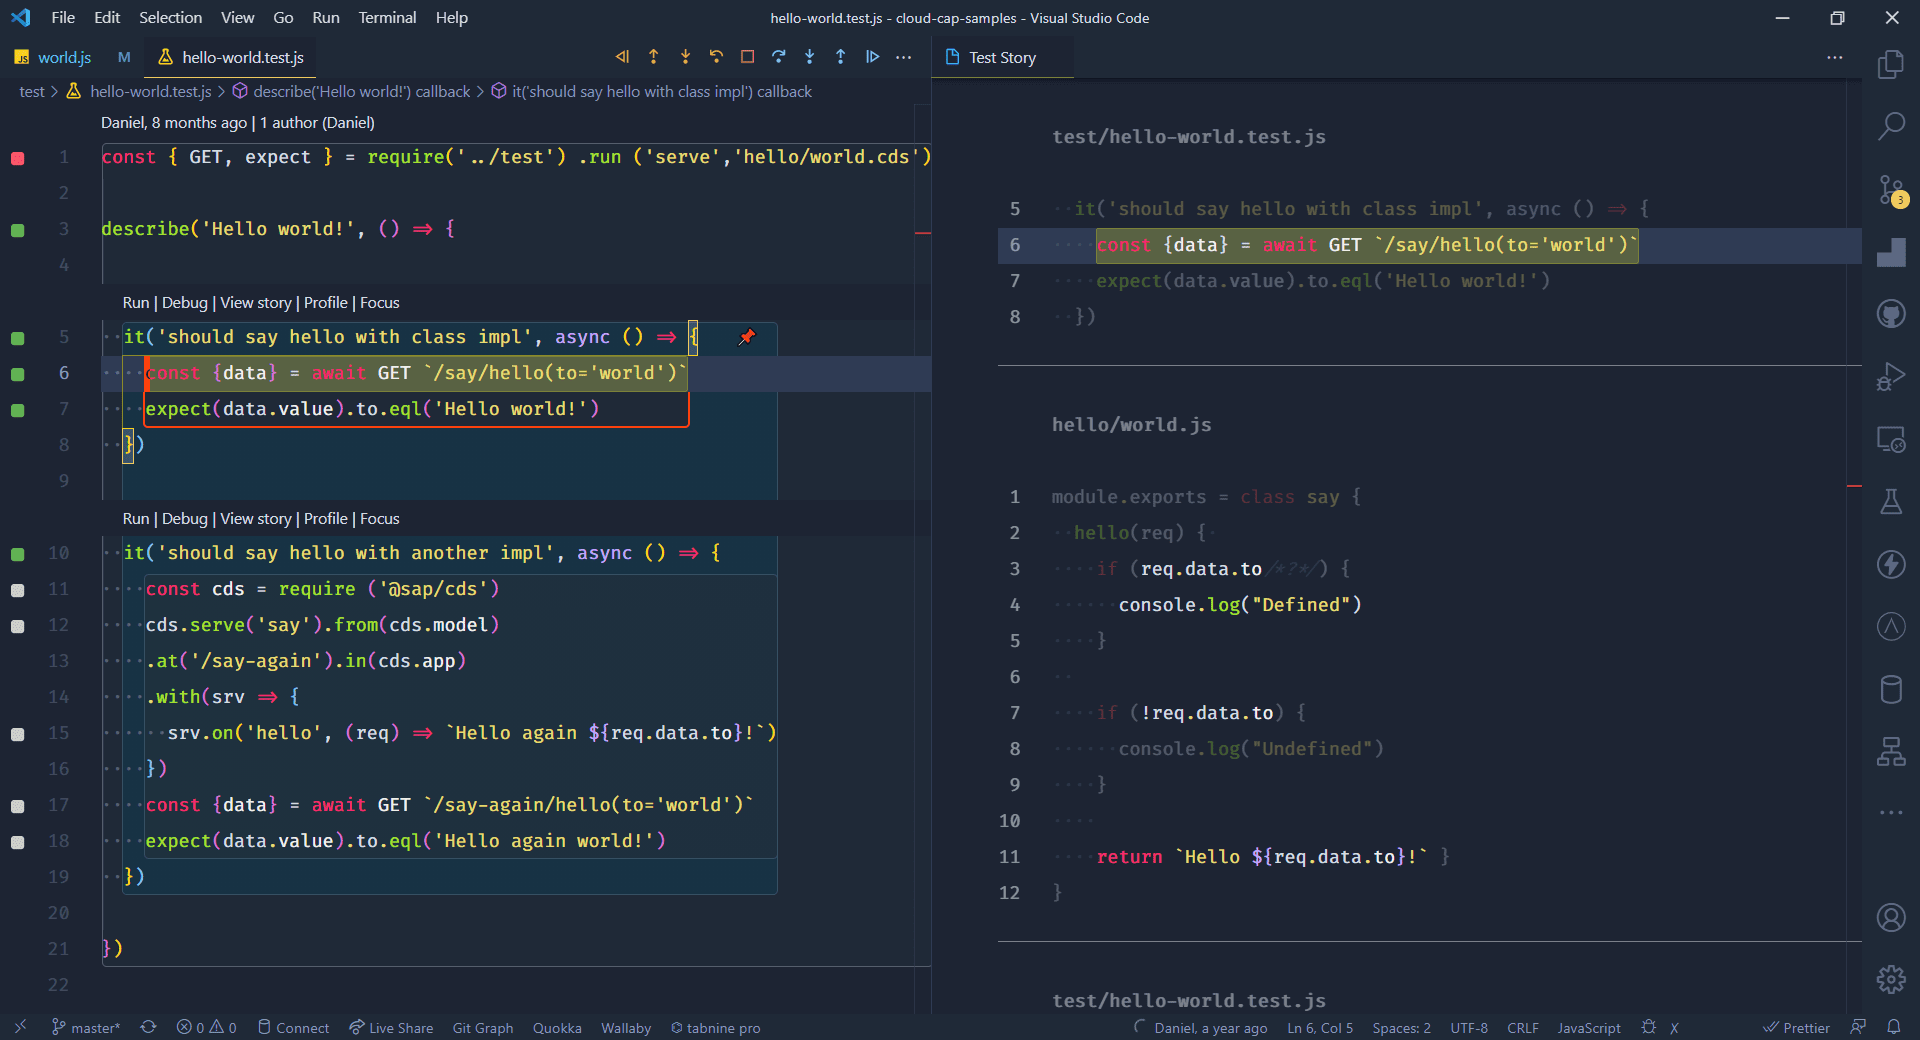 VSCode Wallaby Test Story